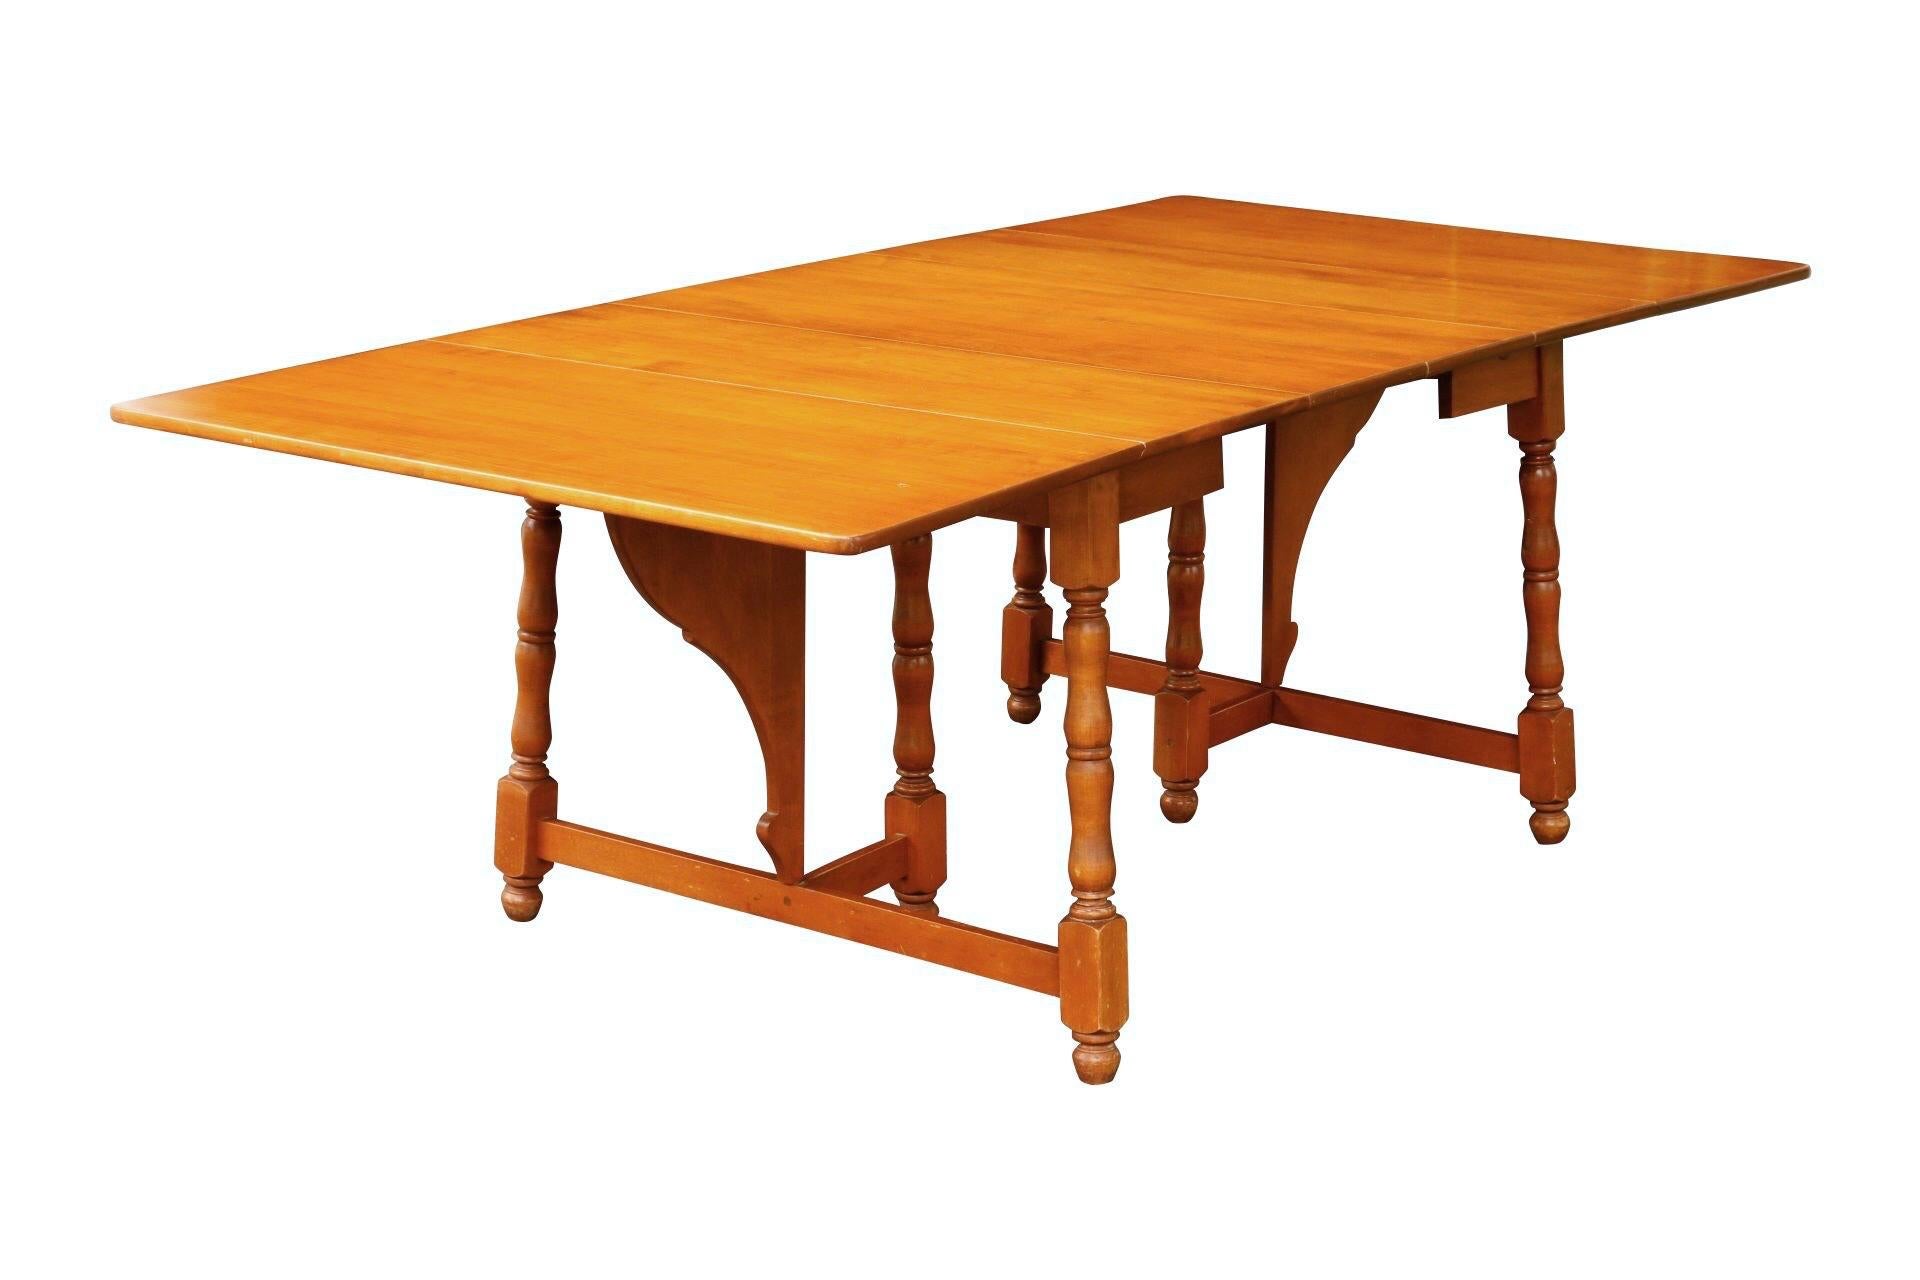 A traditional style drop leaf dining table made by Heywood Wakefield. The drop leaves lift, supported with butterfly brackets to form a rectangular table that seats six. The table extends with two leaves to comfortably seat eight. Six turned legs